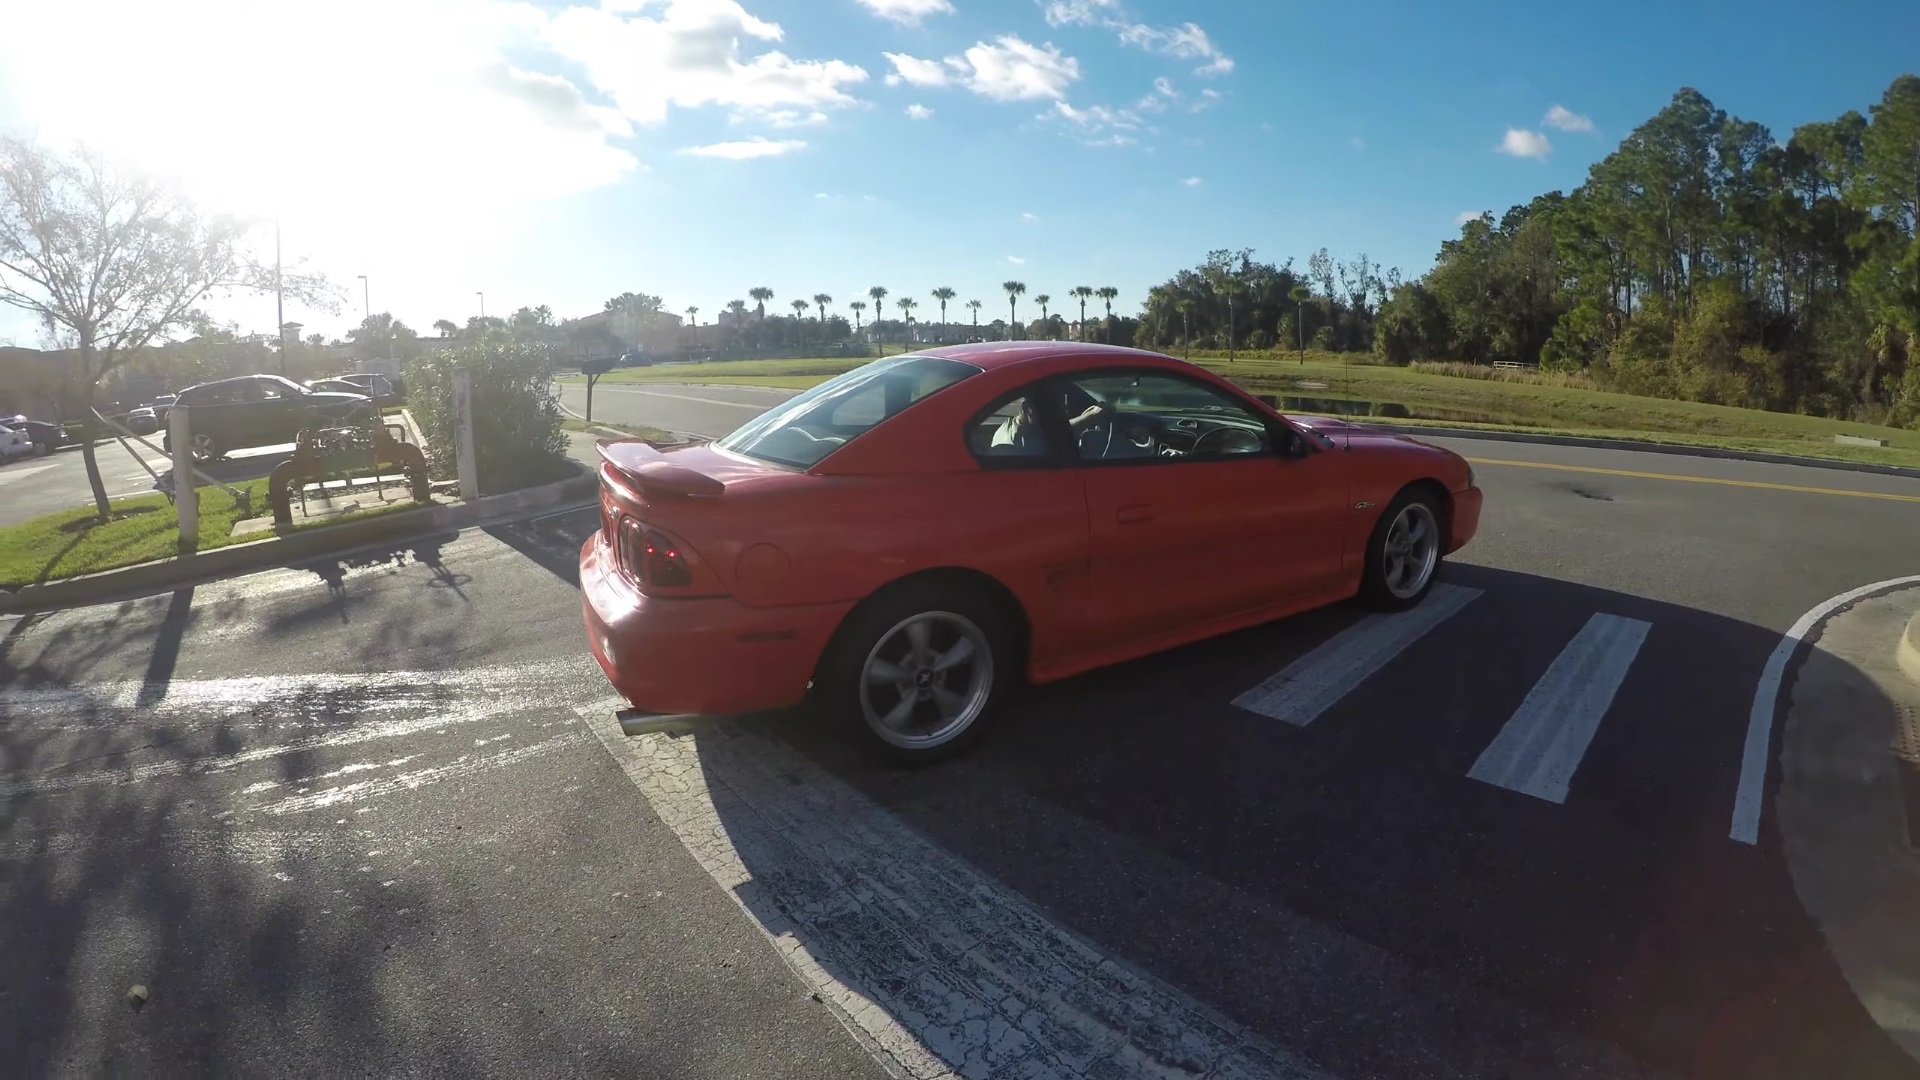 Video: 1997 Ford Mustang GT Owner's Review